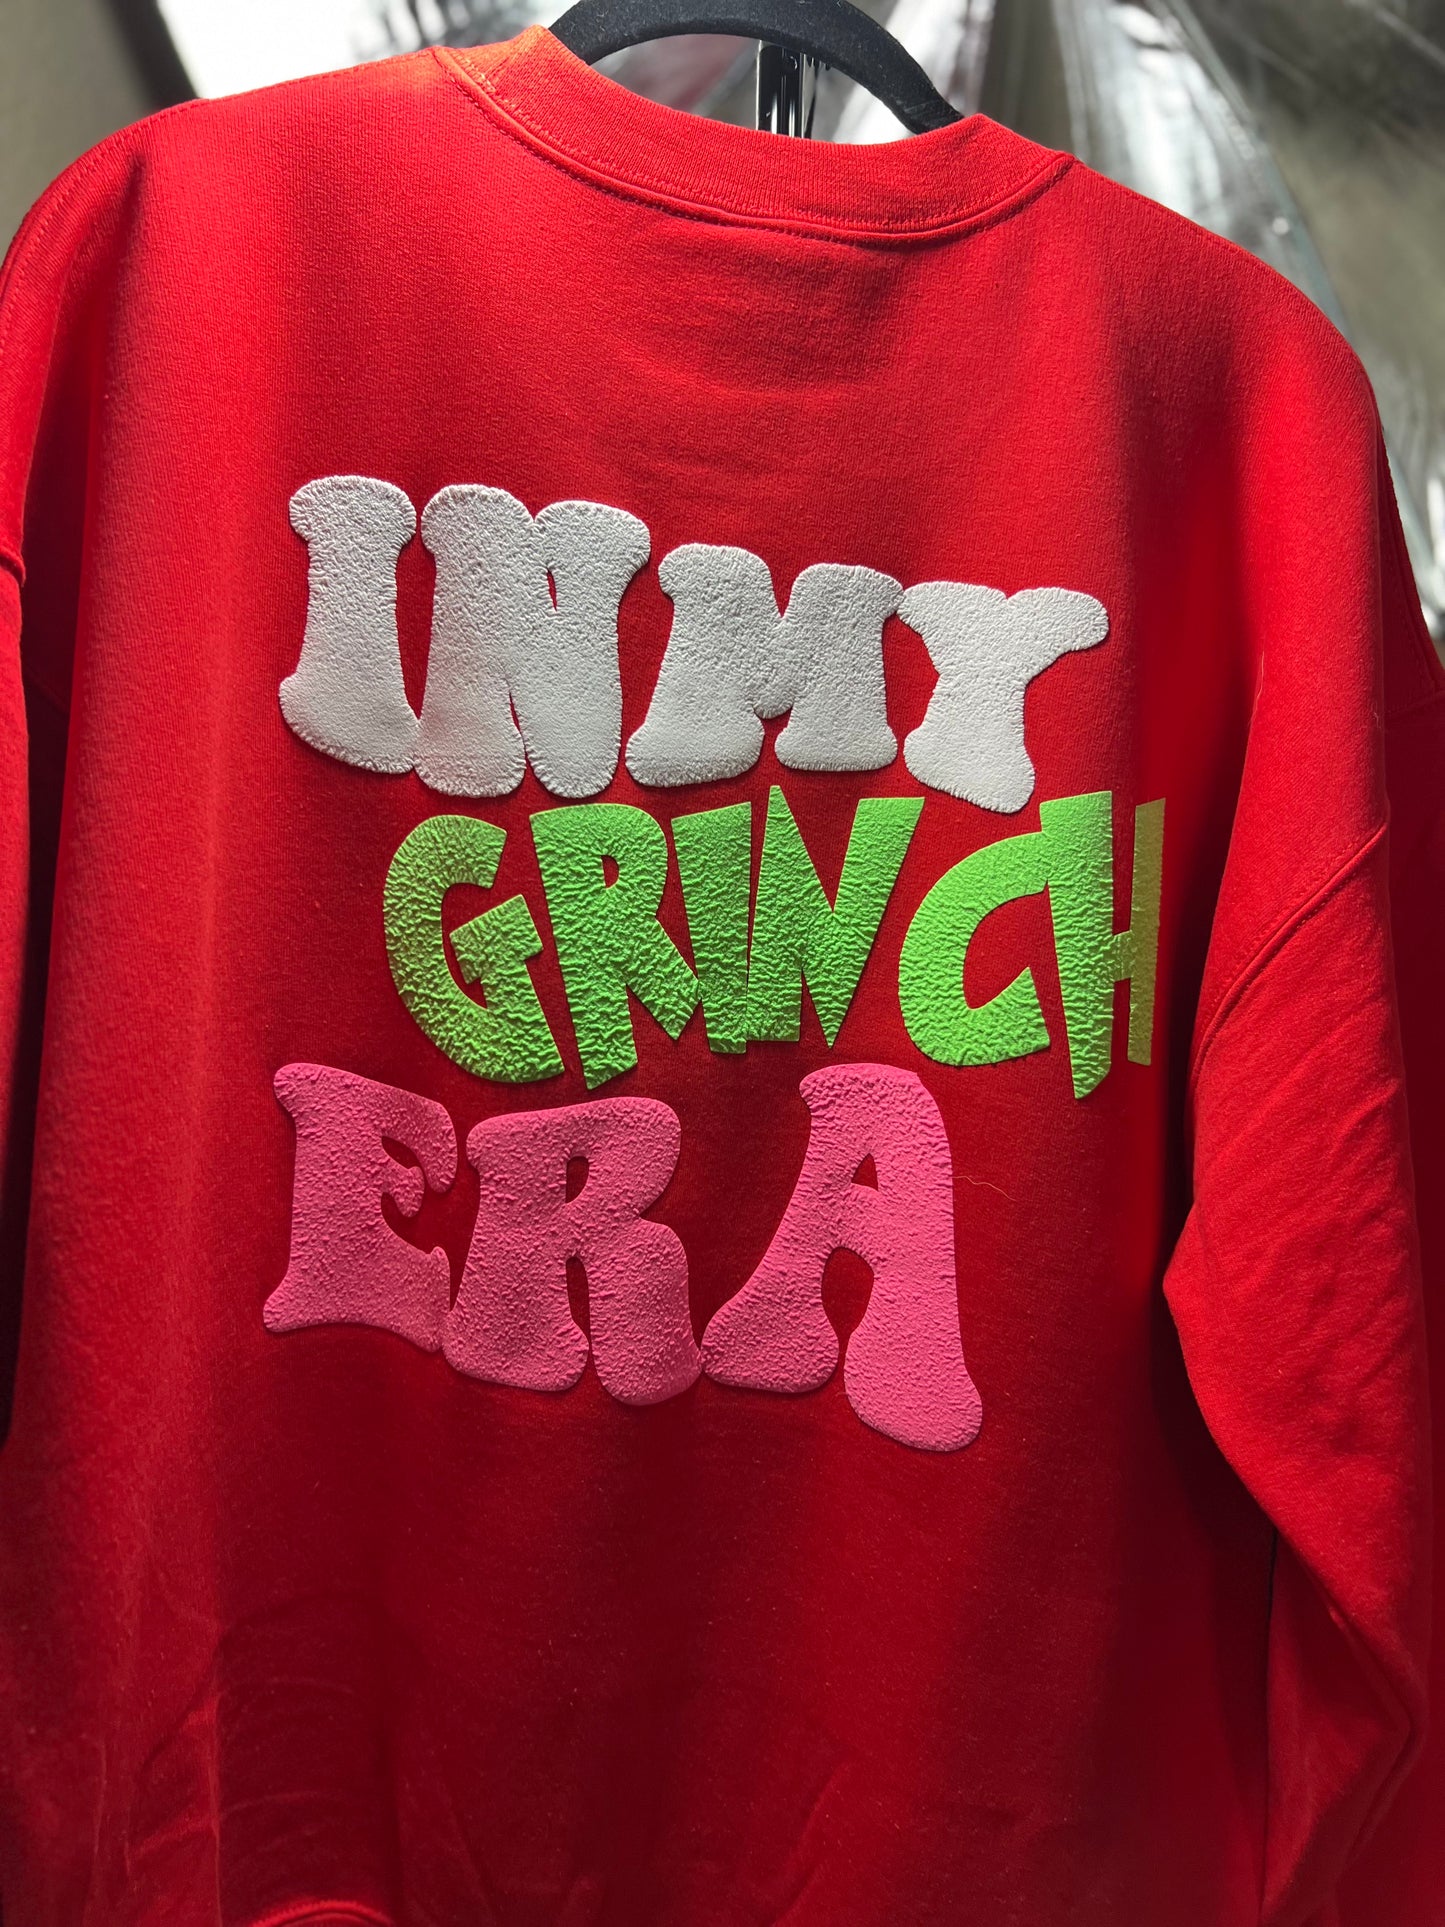 Elevate Your Style: In My Grinch Era Red Sweatshirt - Cozy and Playful Fashion